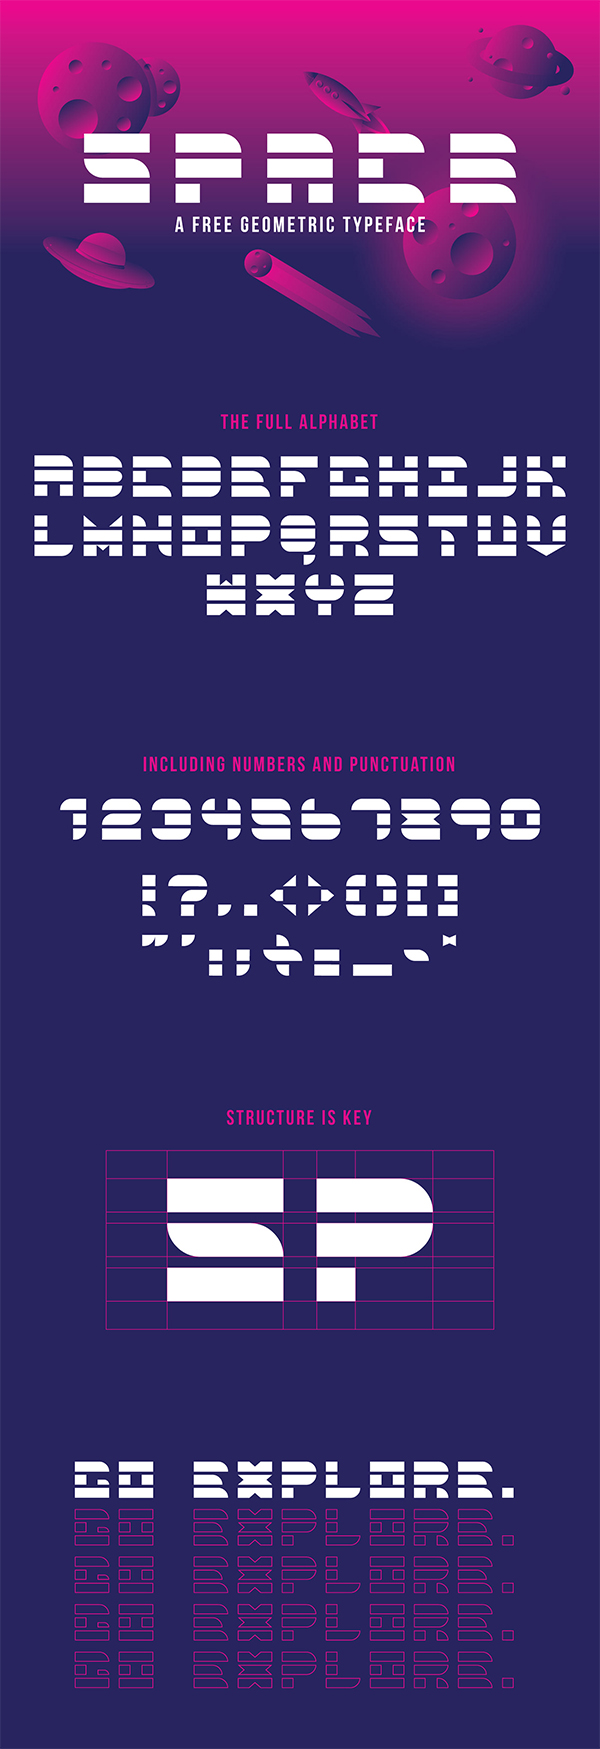 Space Free Font